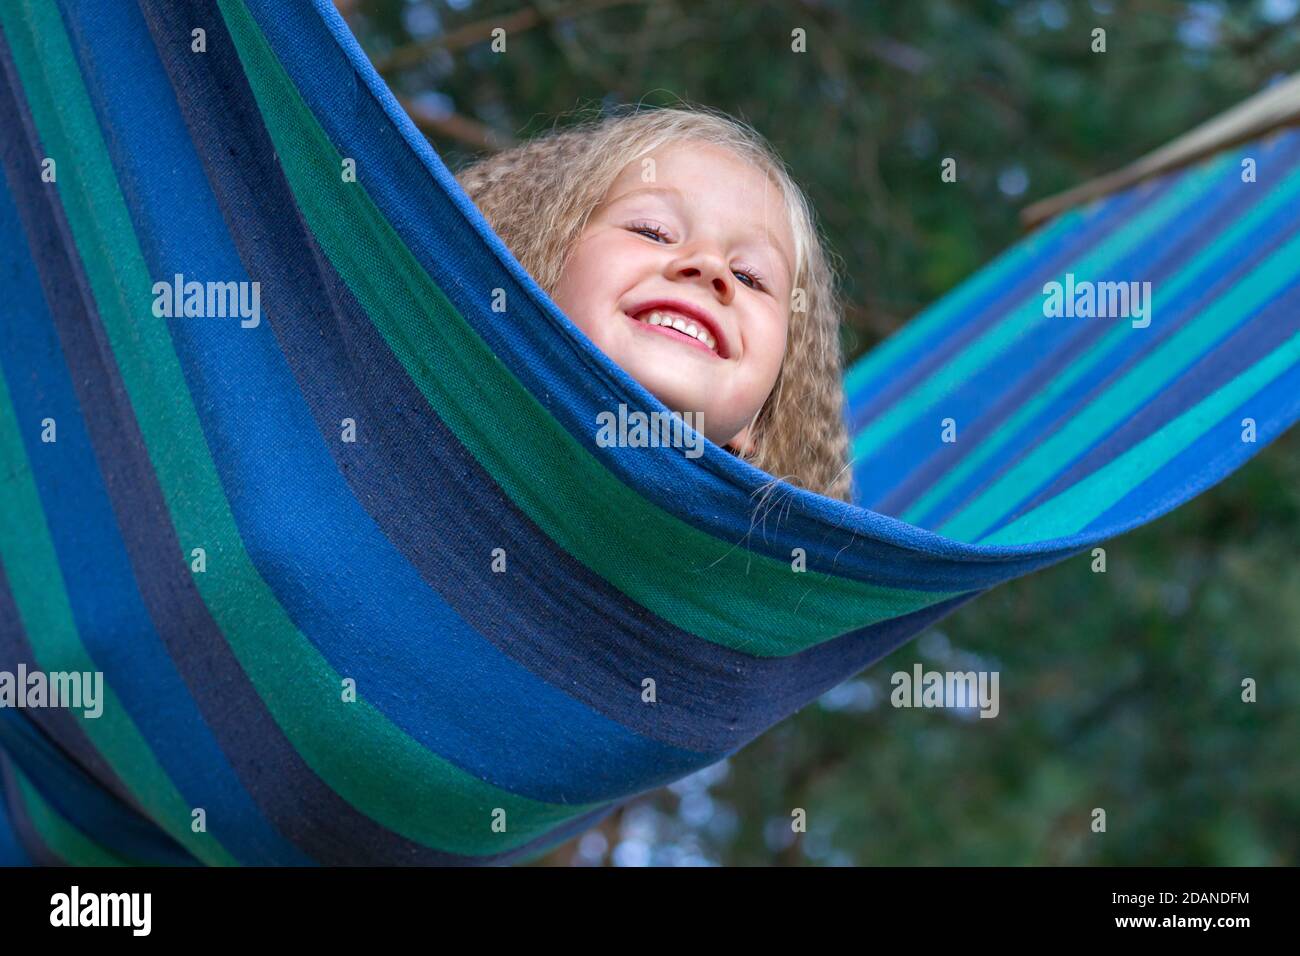 Little happy Caucasian girl with blond curly hair sways on multi-colored striped hammock. Portrait of a child, close-up. Peekaboo. Lifestyle. Carefree Stock Photo